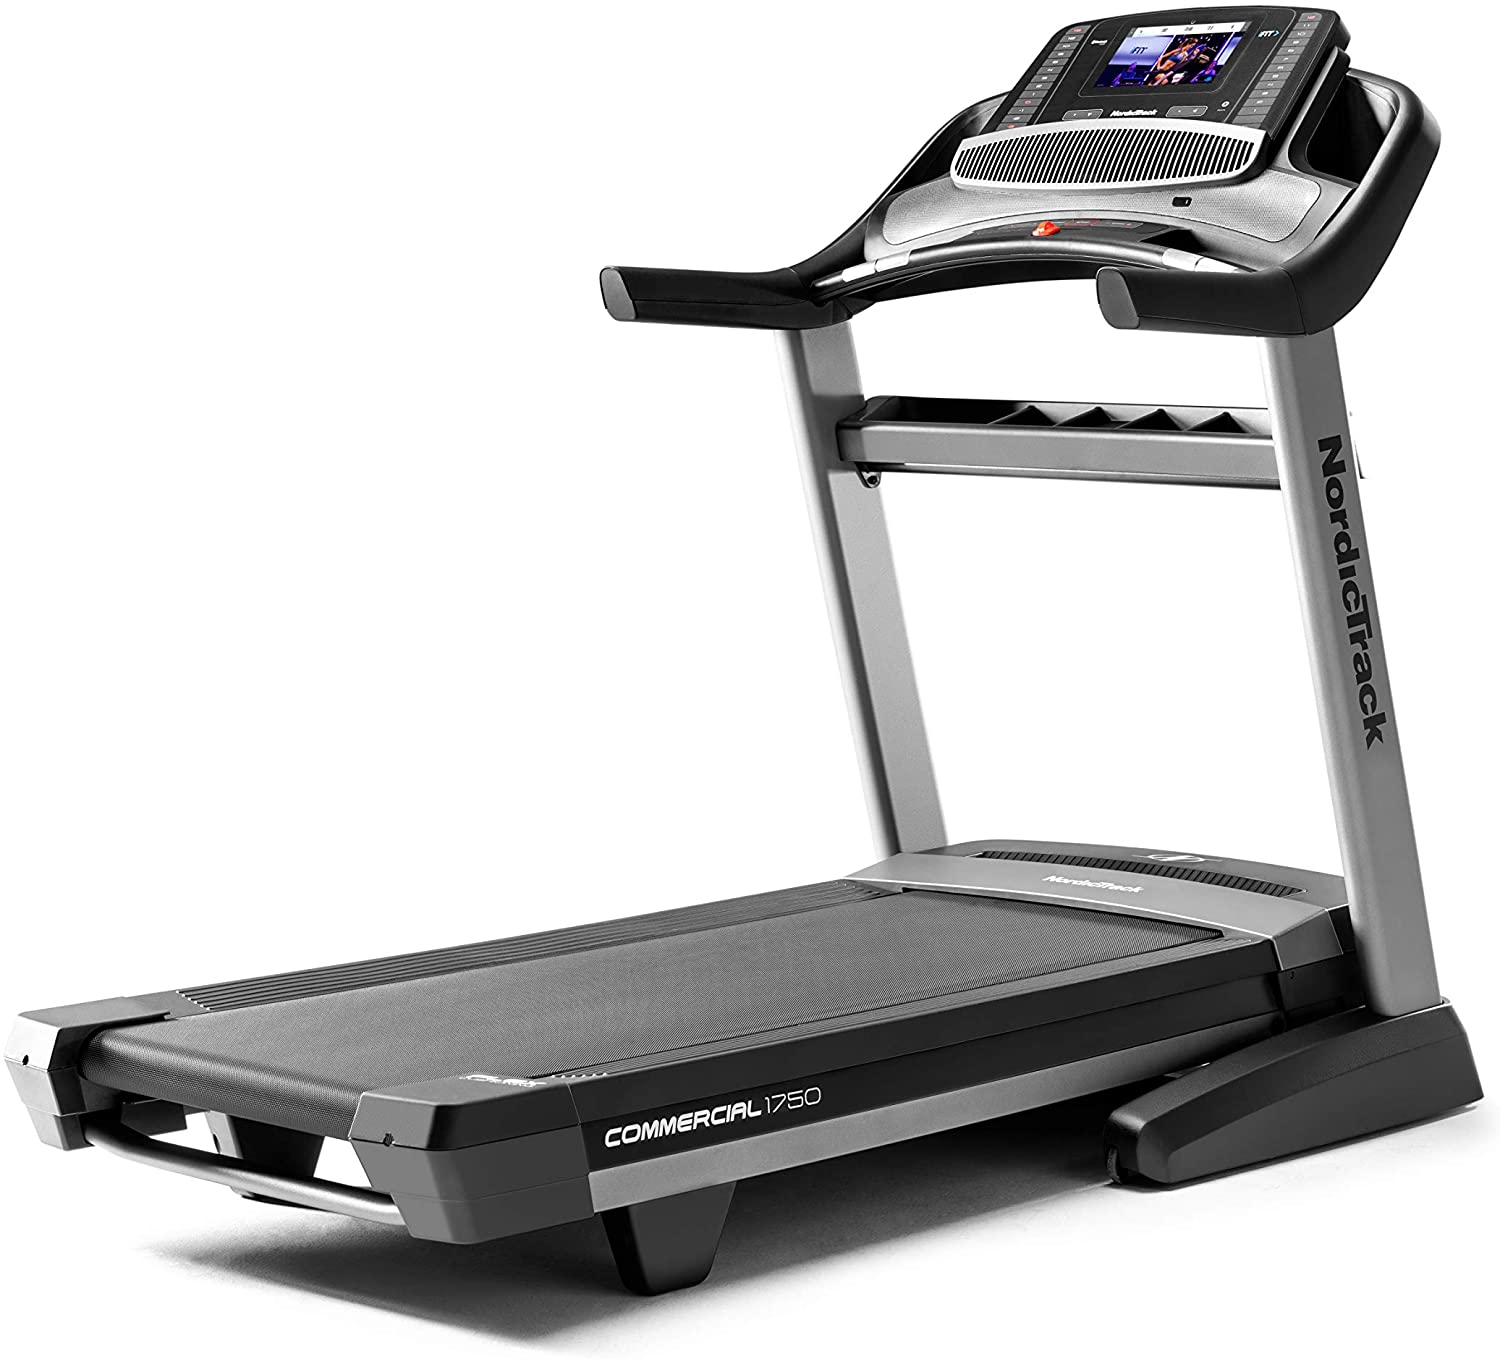 The 3 Best Treadmill Under 500 Affordable Treadmills for an excellent